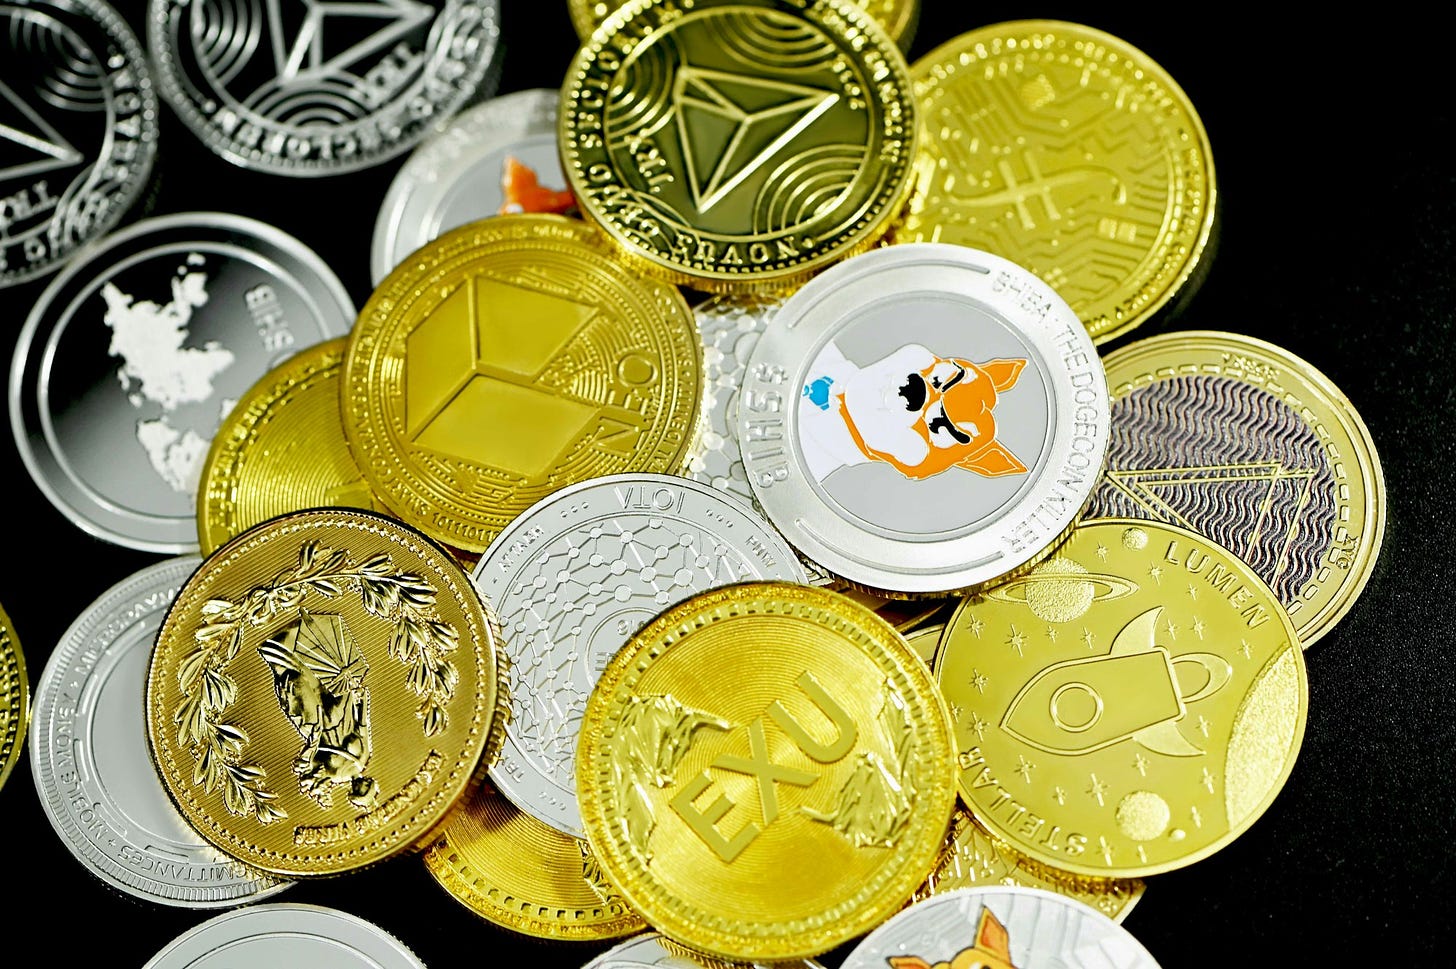 All cryptocurrency coins are together